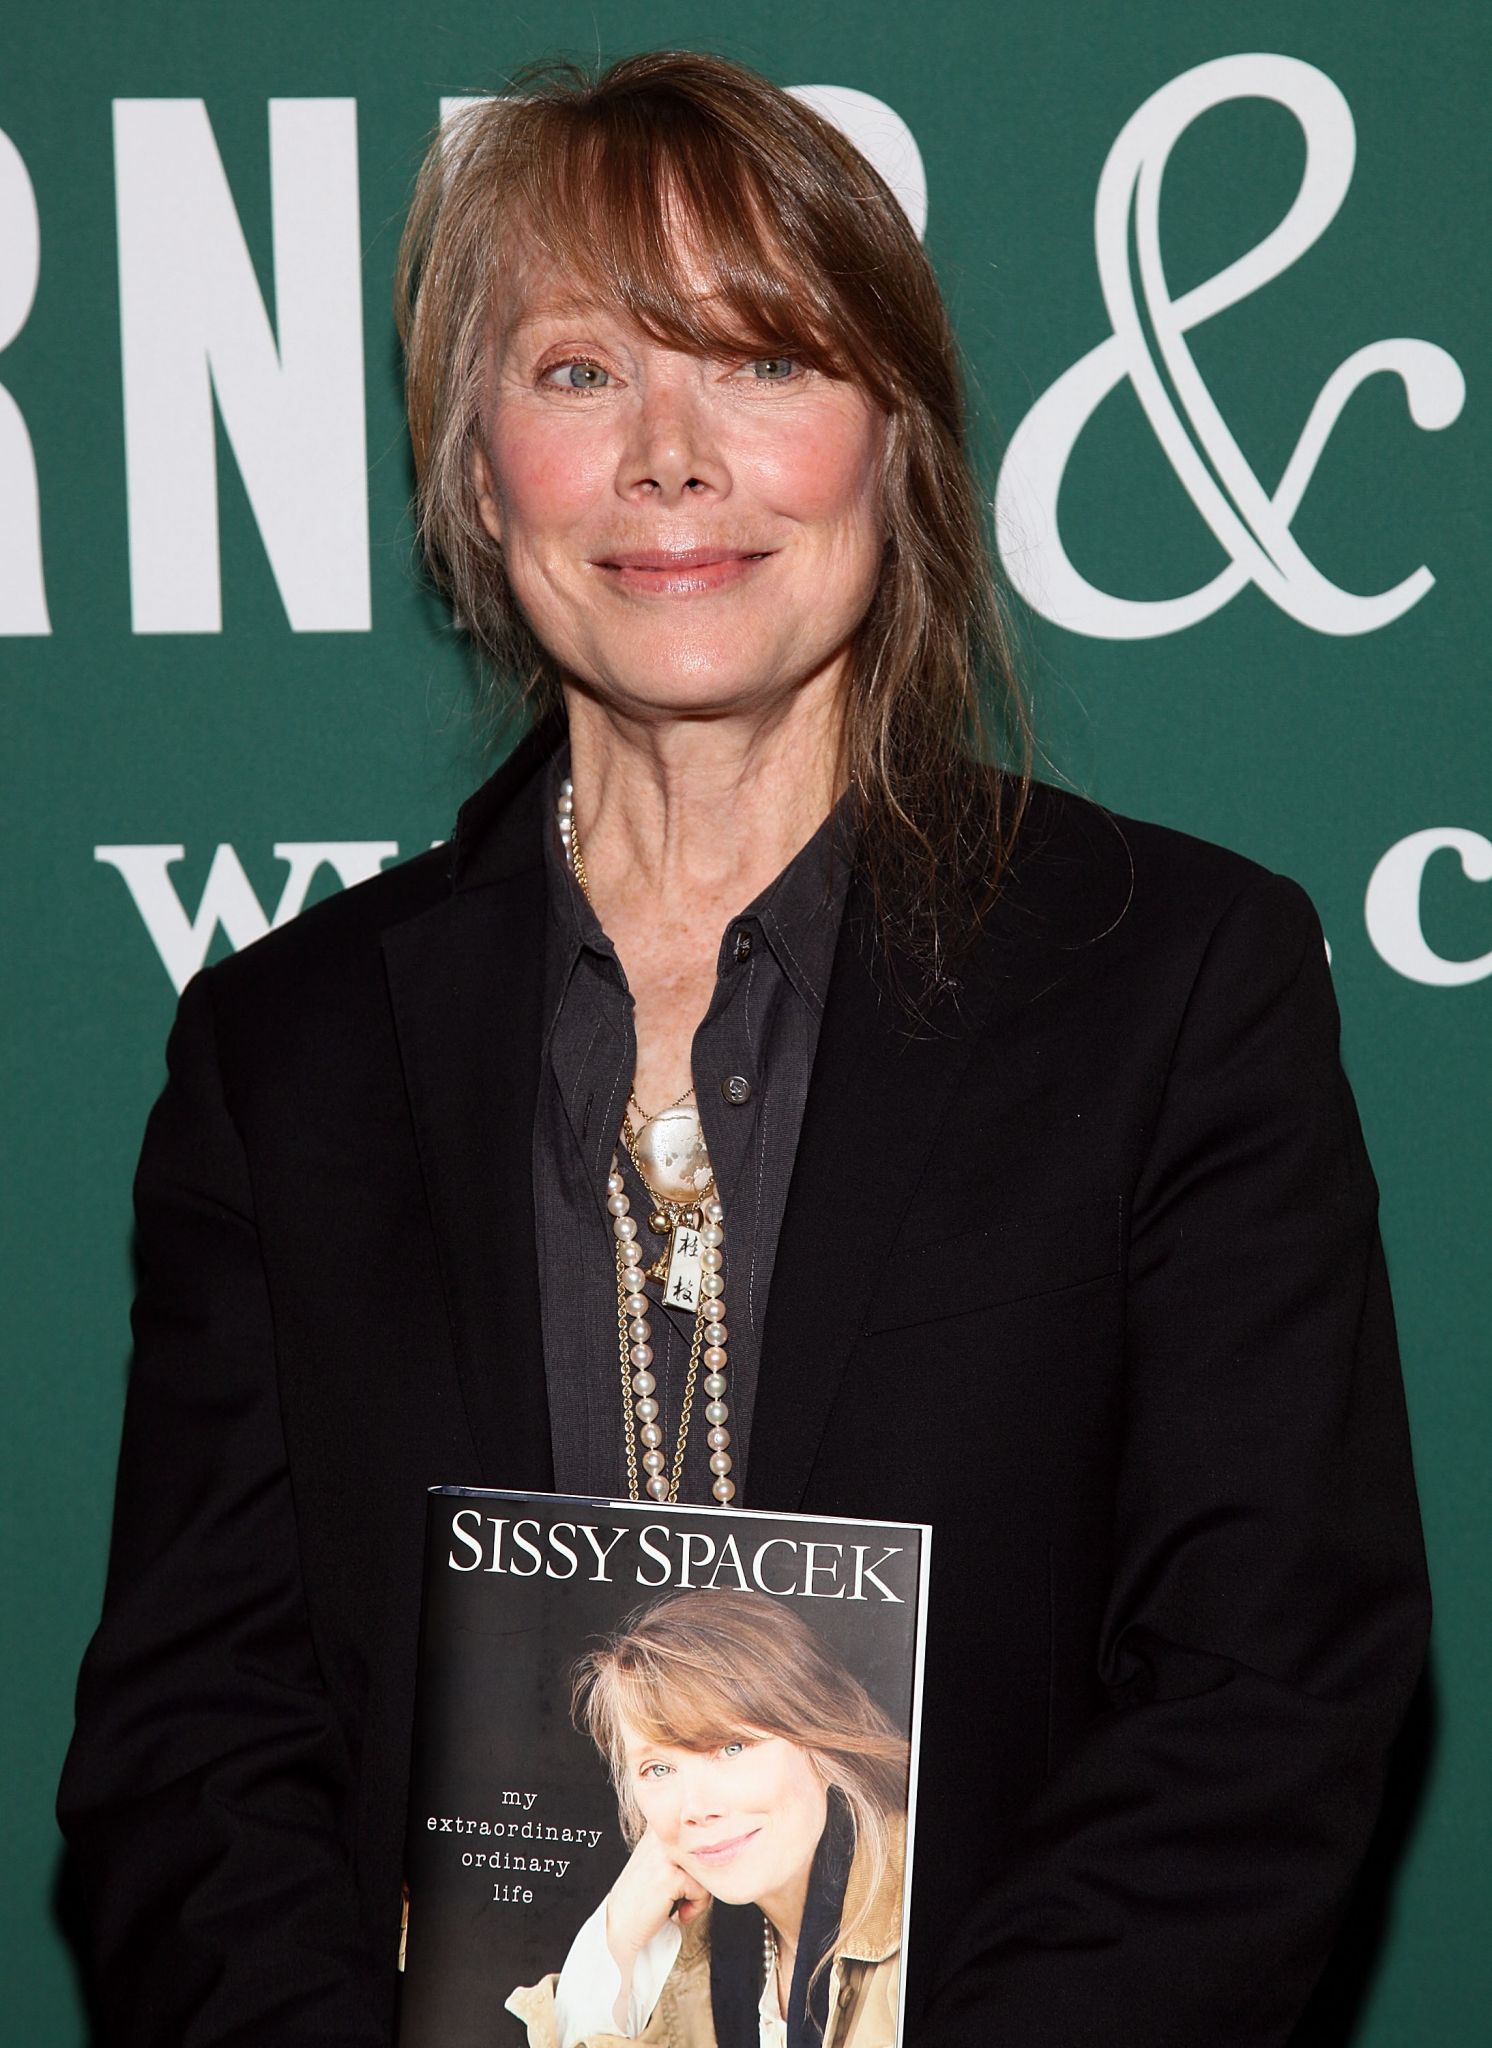 Sissy Spacek and daughter Schuyler Fisk News Photo - Getty Images